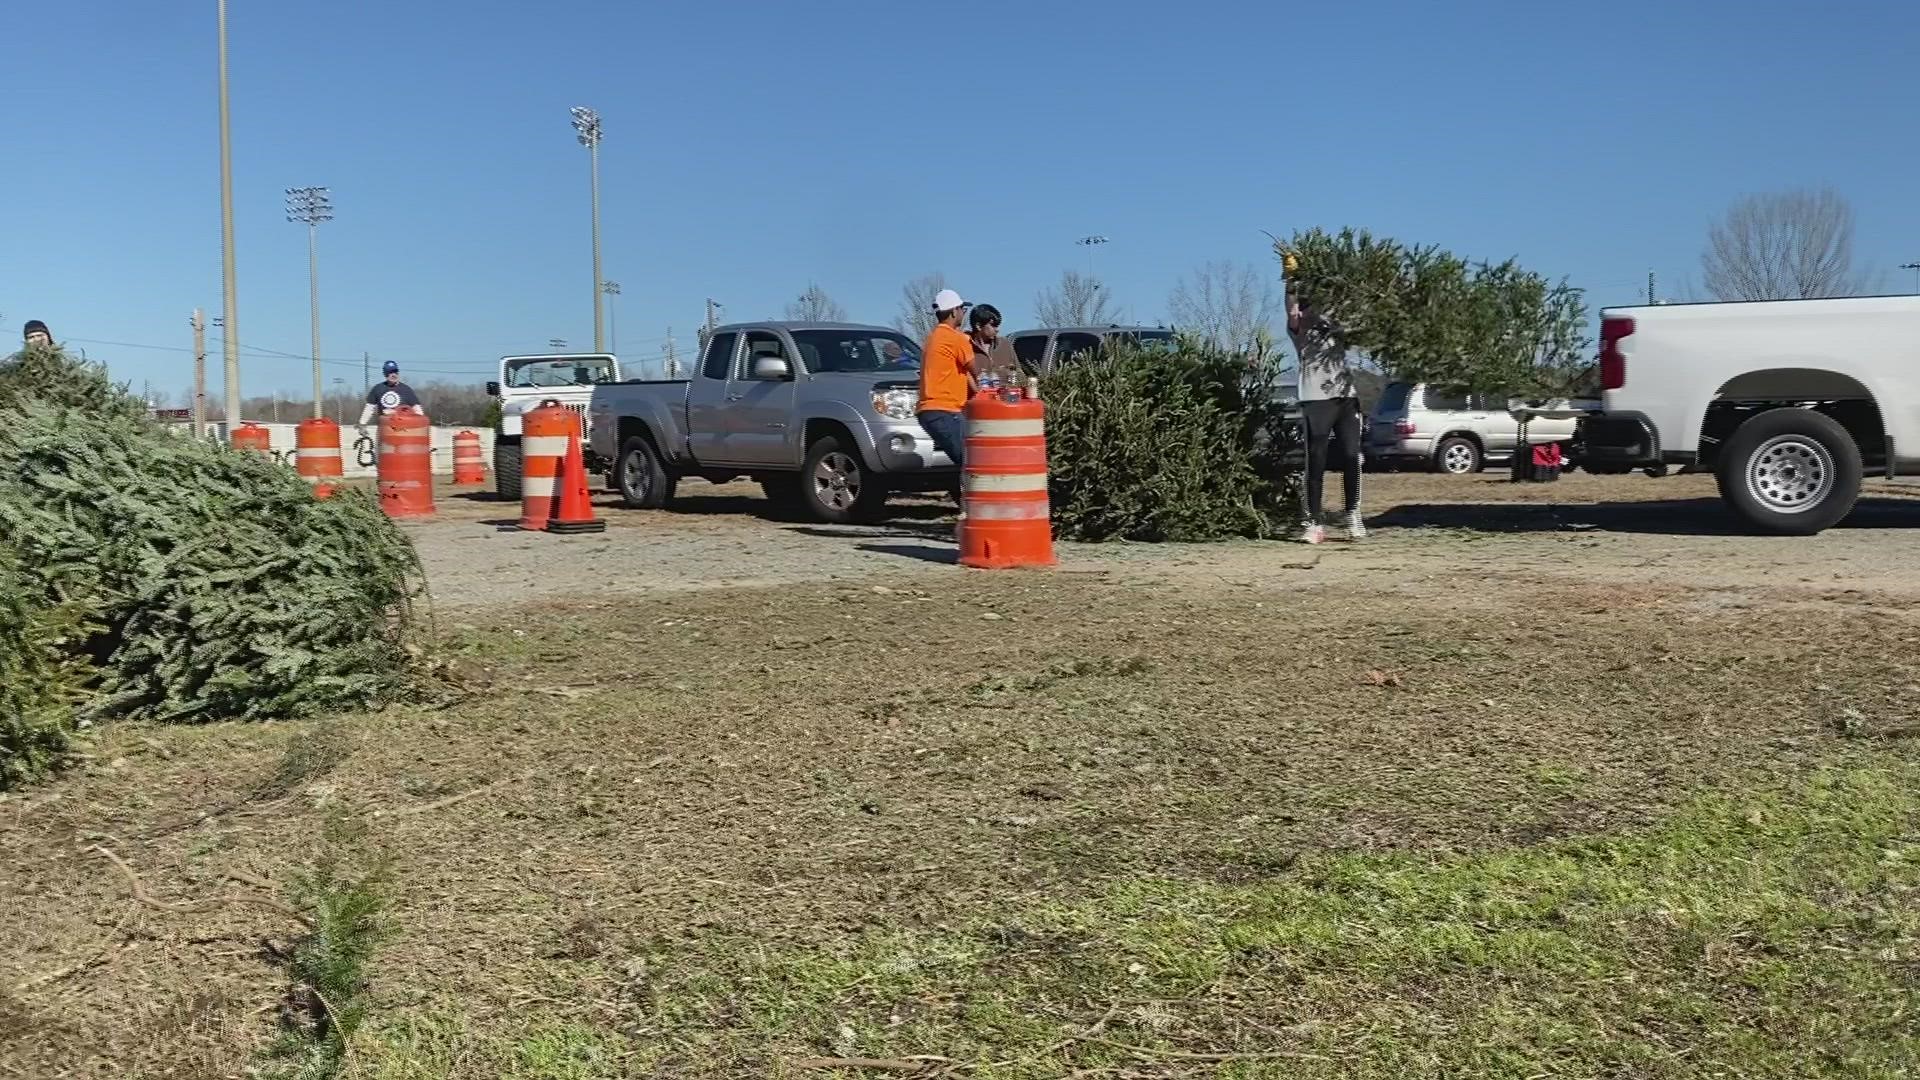 Folks brought in their old Christmas trees to turn into mulch this morning at Luther Williams Field.